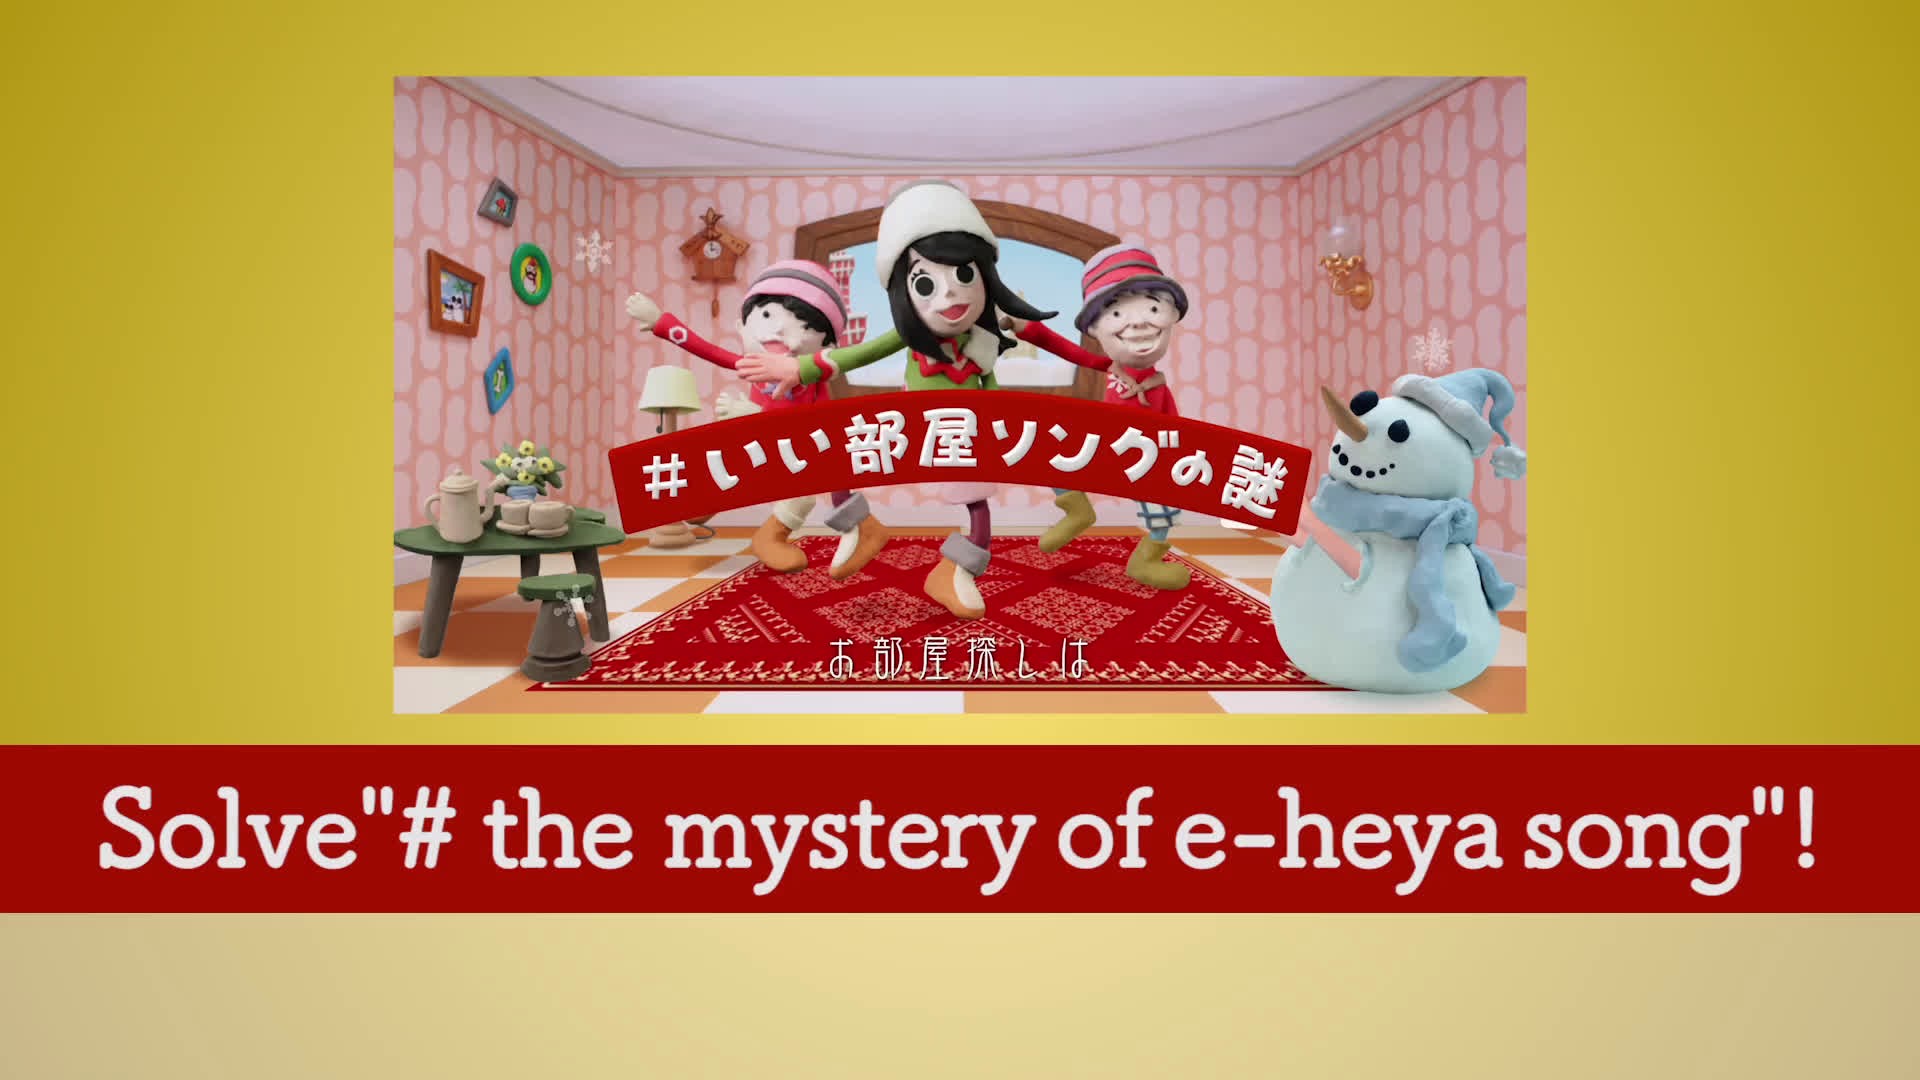 Solve"# the mystery of e-heya song"!